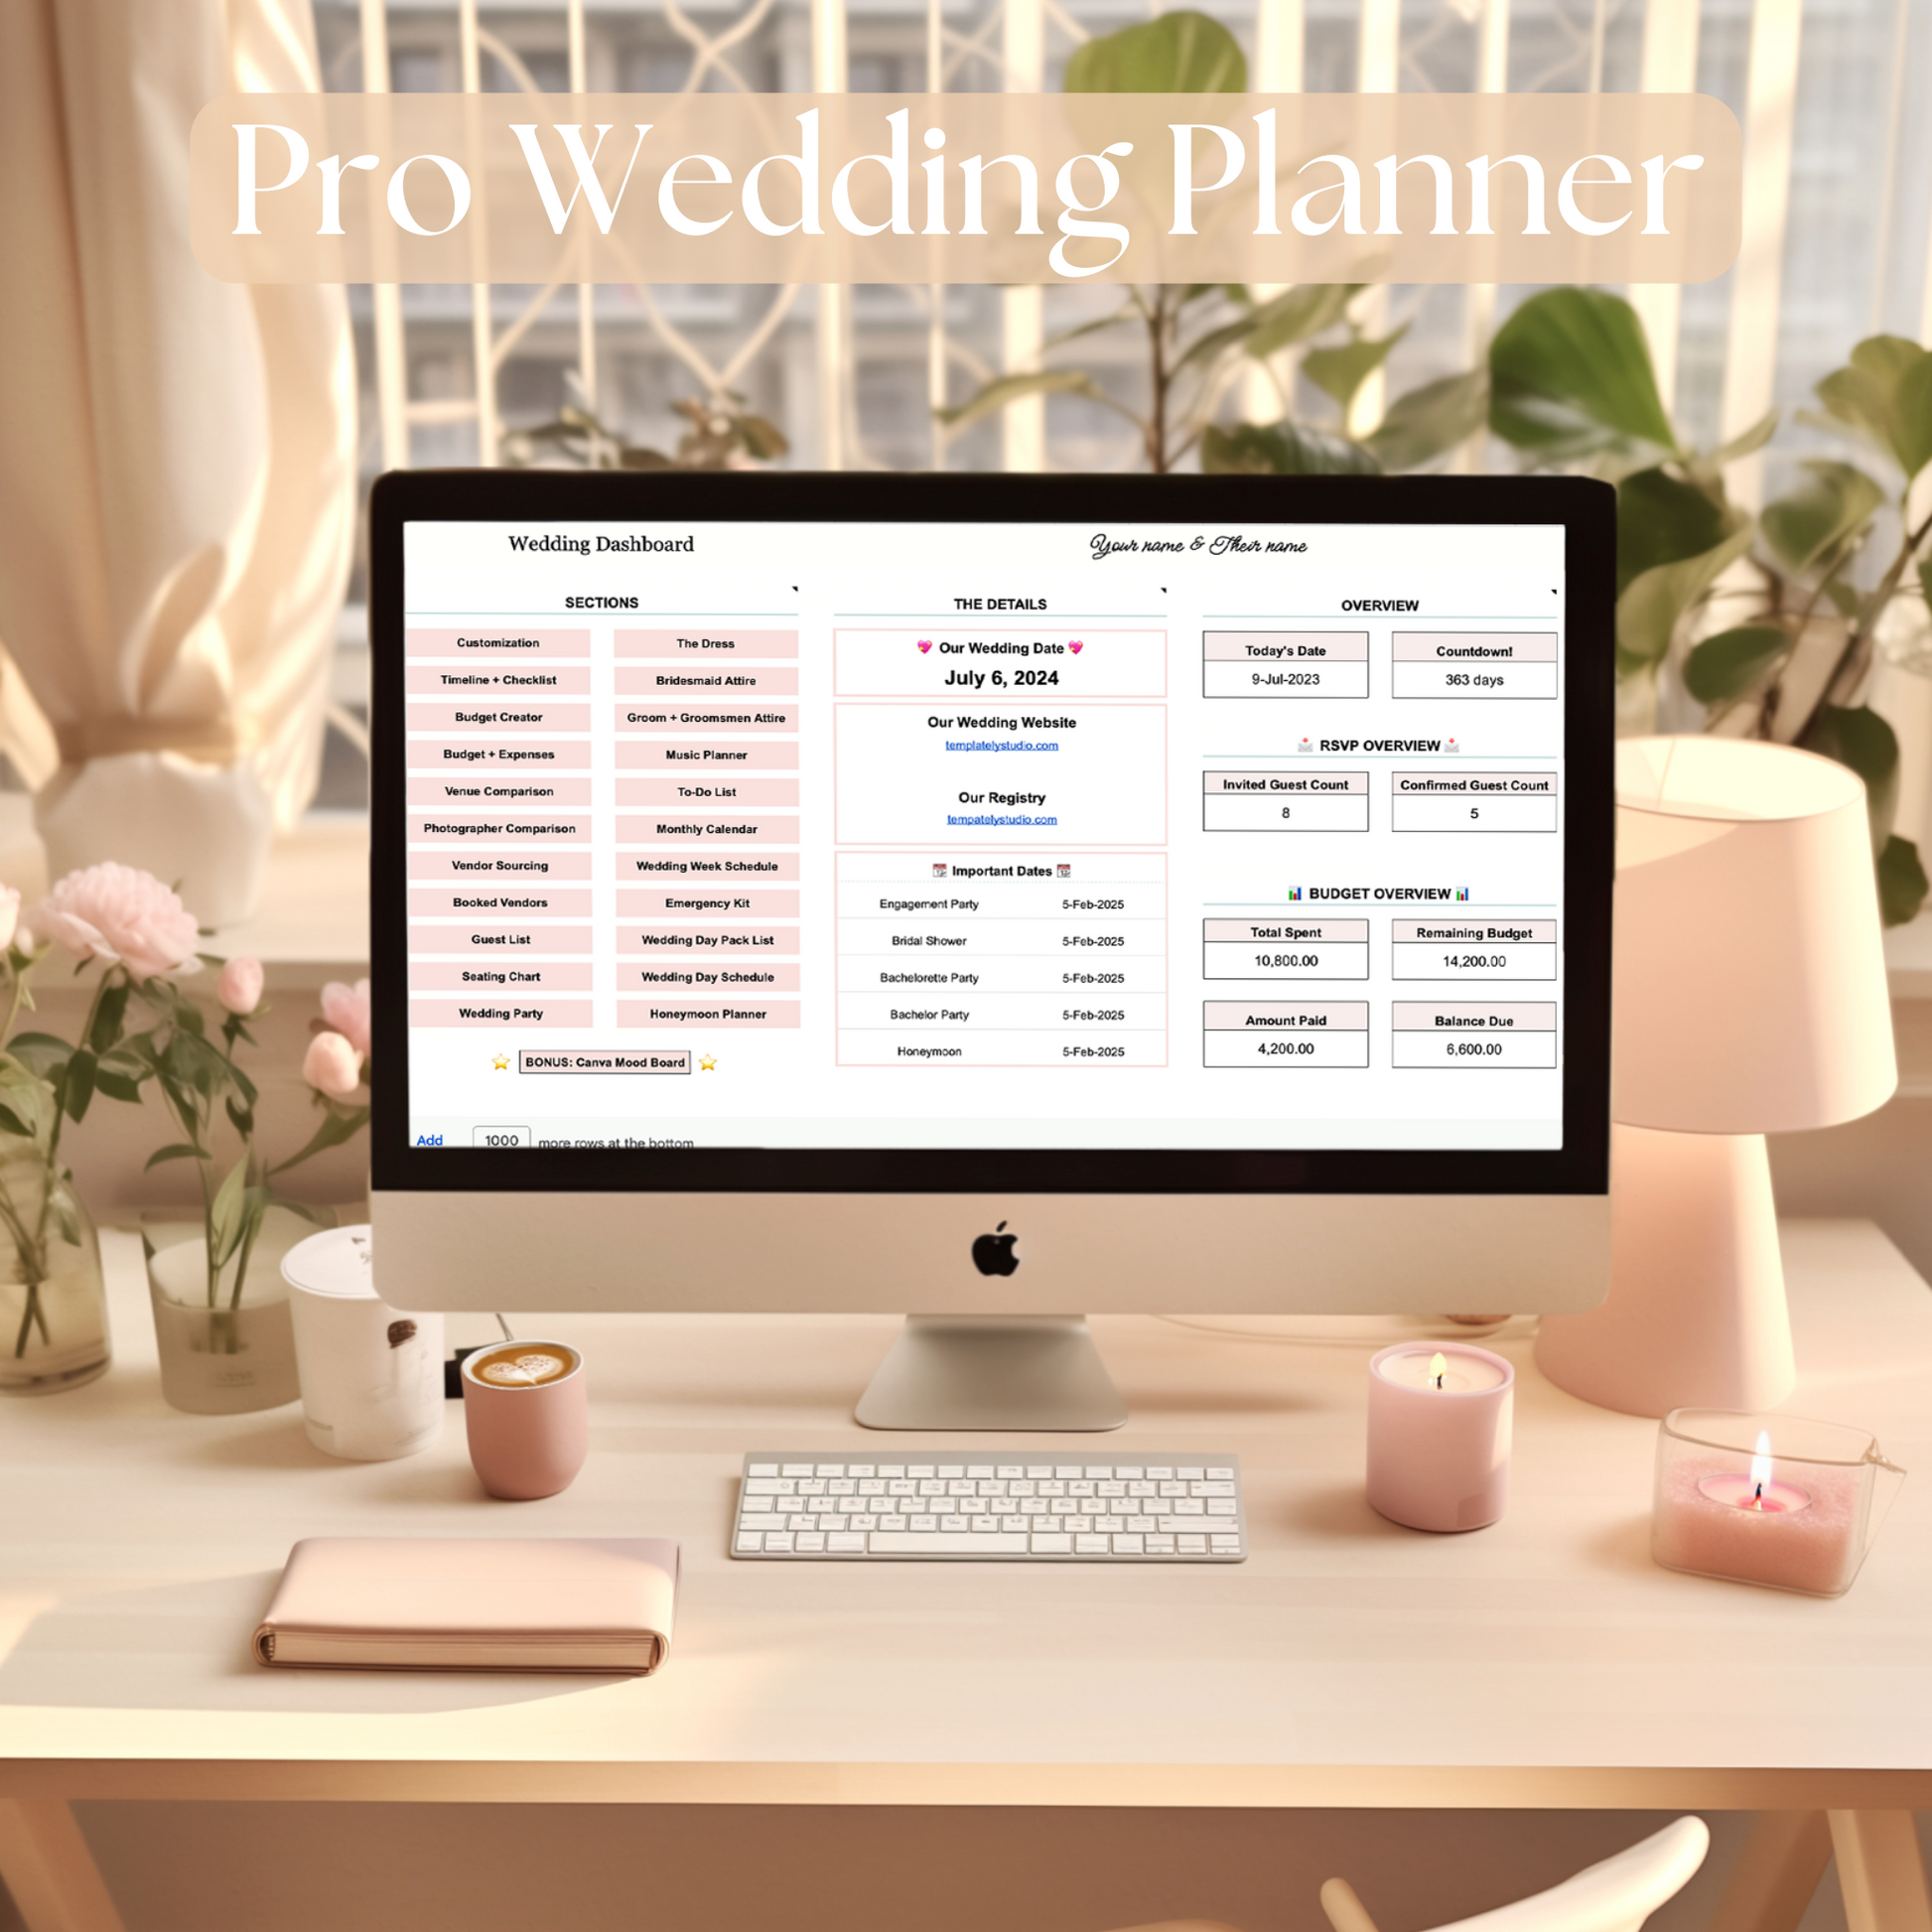 Pro digital wedding planner google sheets spreadsheet template. How to plan a wedding? This planner is the key to a stress-free wedding!